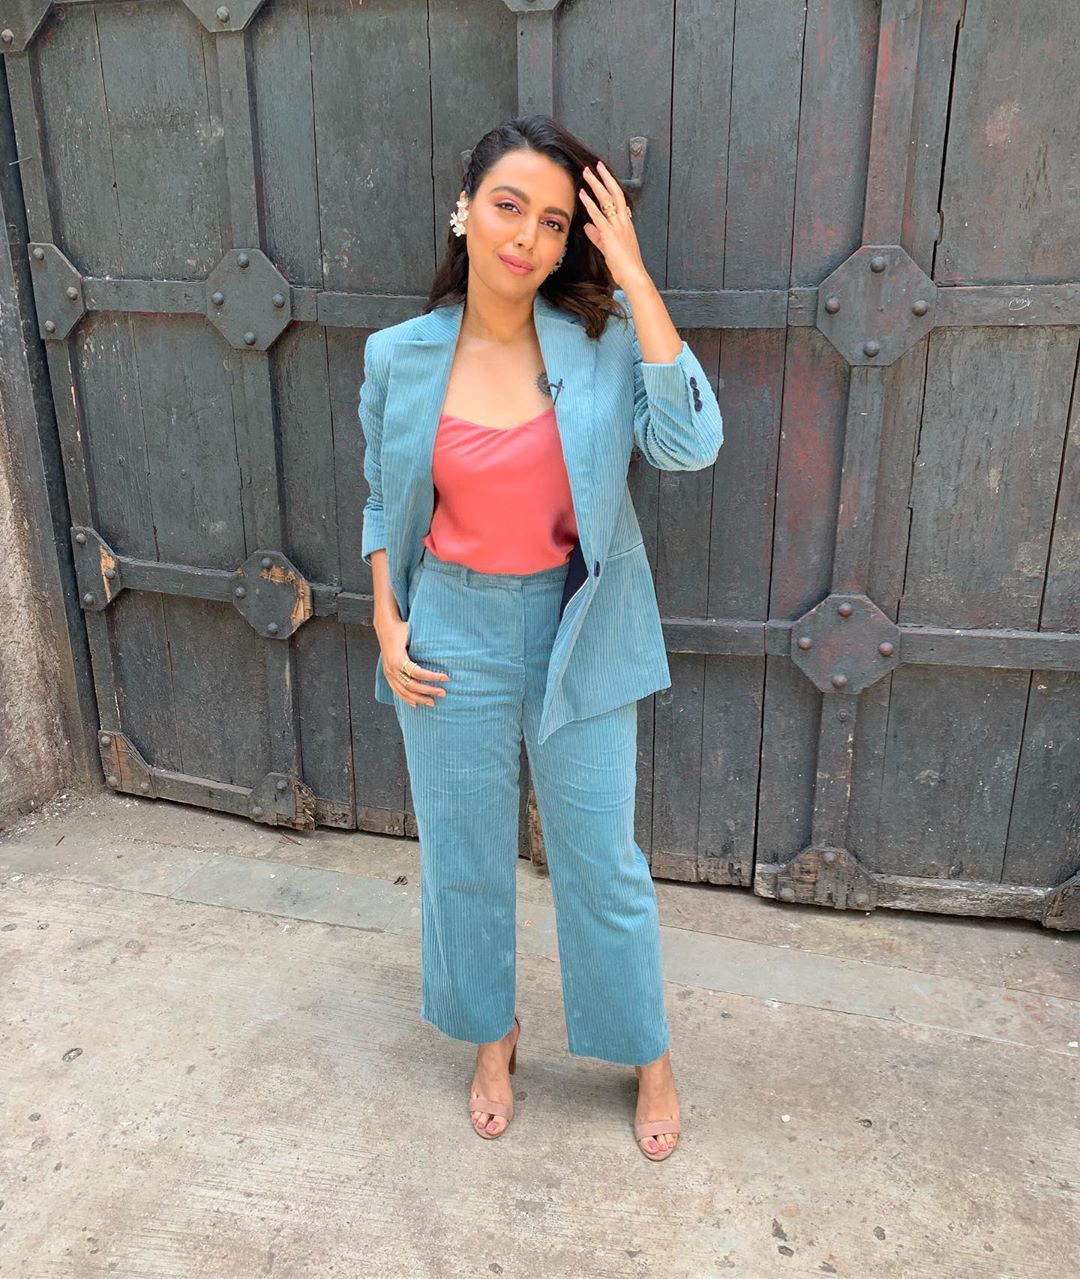 Swara Bhaskar looks all dressed up in THESE recent photos - The Indian Wire